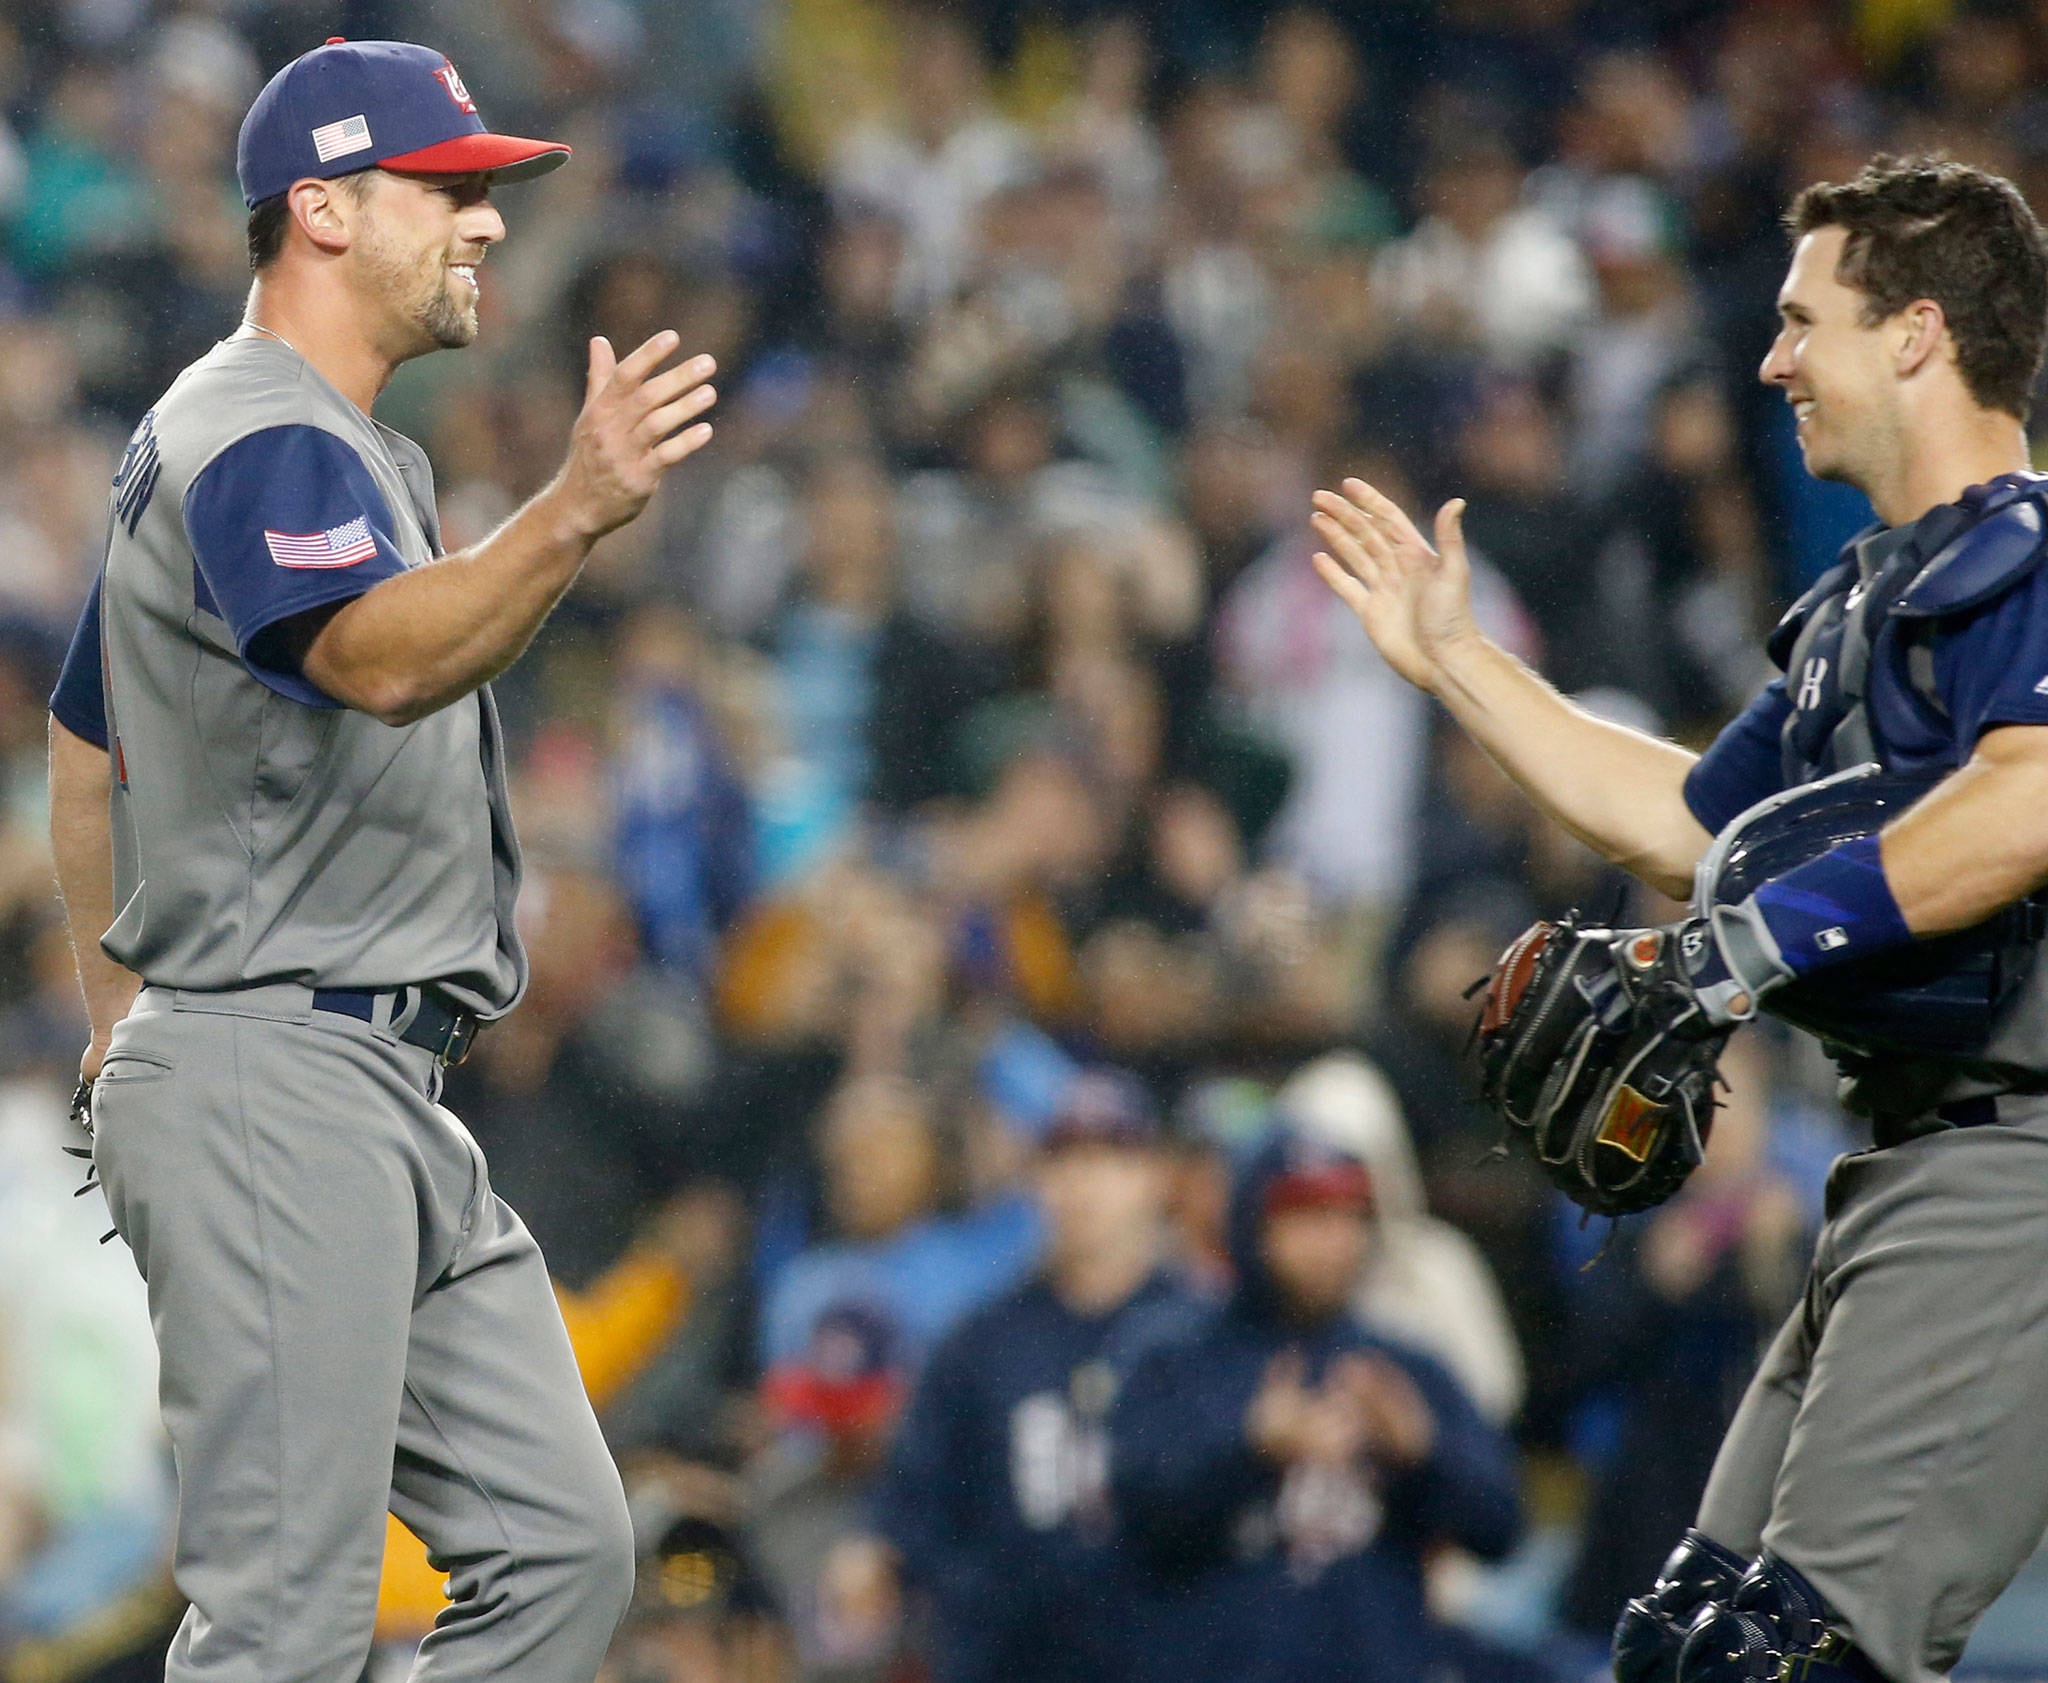 (Allen J. Schaben/Los Angeles Times) United States relief pitcher Luke Gregerson, left, celebrates with catcher Buster Posey after striking out Japan’s Nobuhiro Matsuda for the final out in the World Baseball Classic semifinals at Dodger Stadium in Los Angeles on Tuesday. The U.S. advanced, 2-1.